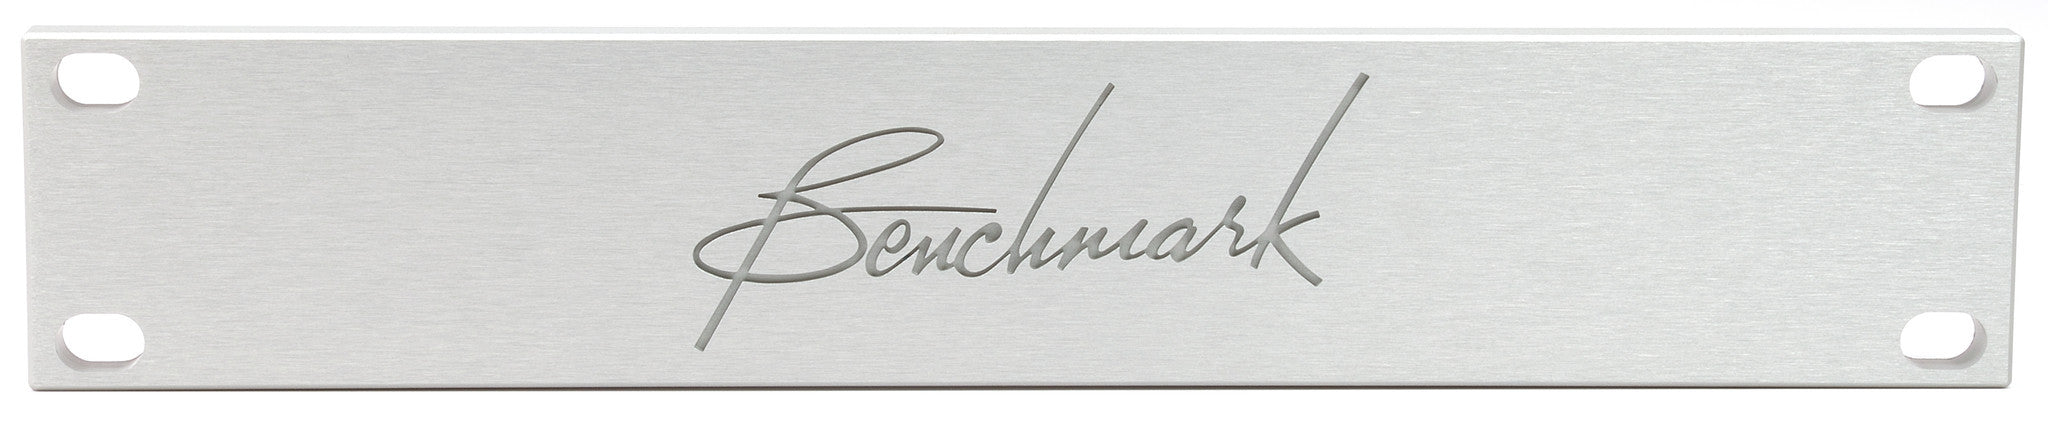 Benchmark blank front panel silver